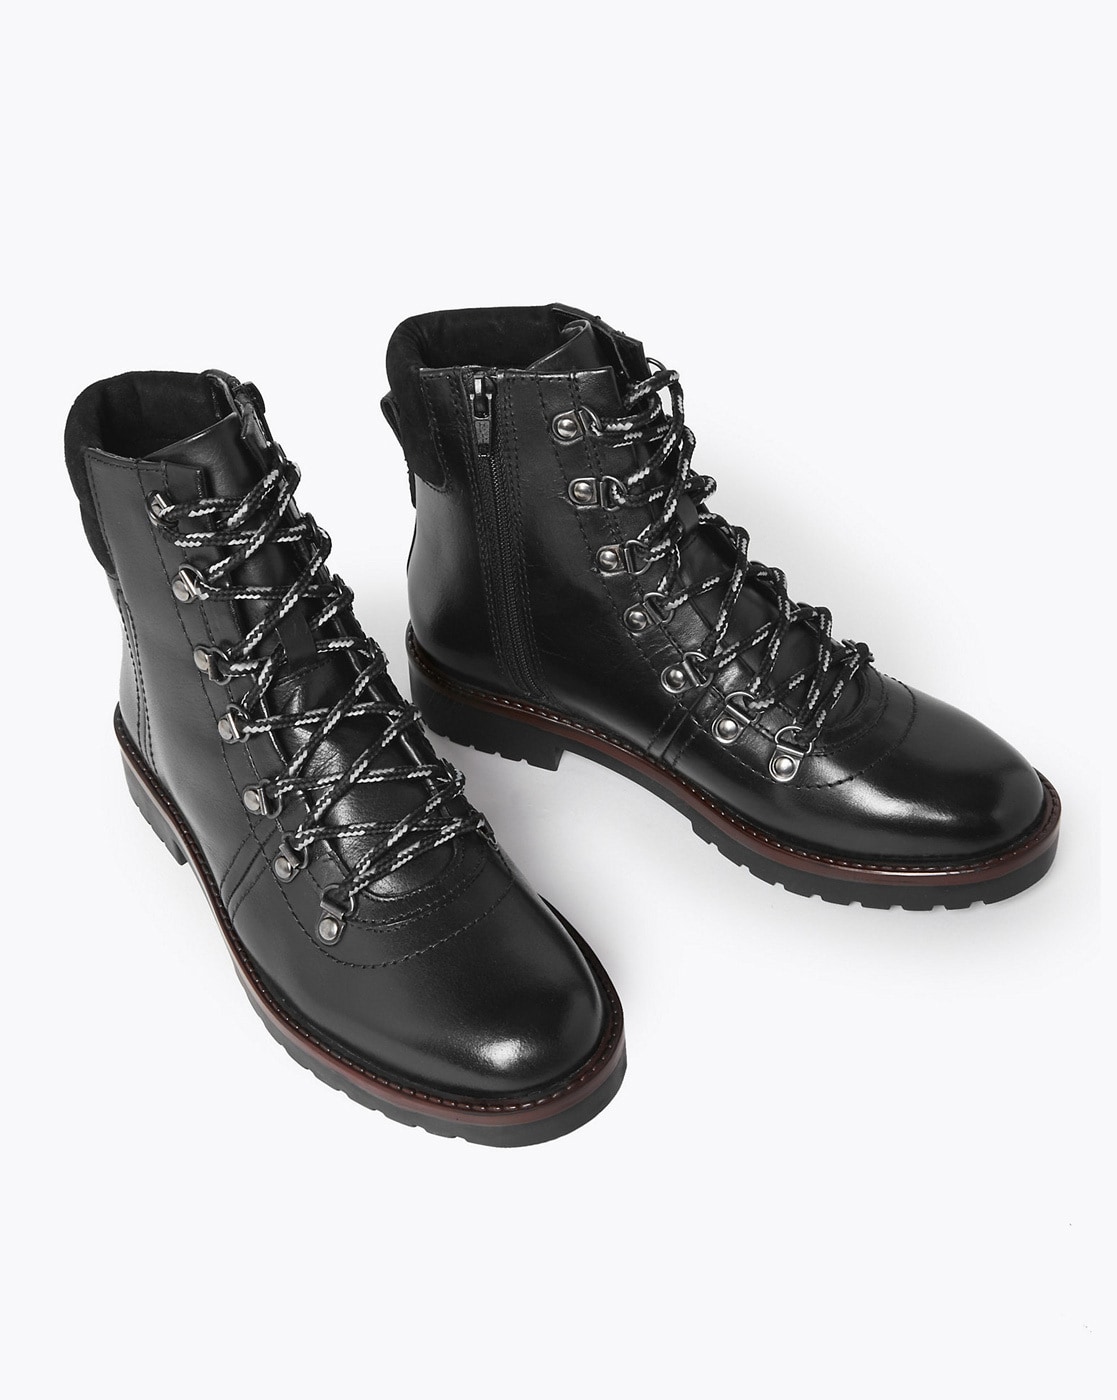 Marks And Spencers Boots Order Discounts, Save 40% | jlcatj.gob.mx